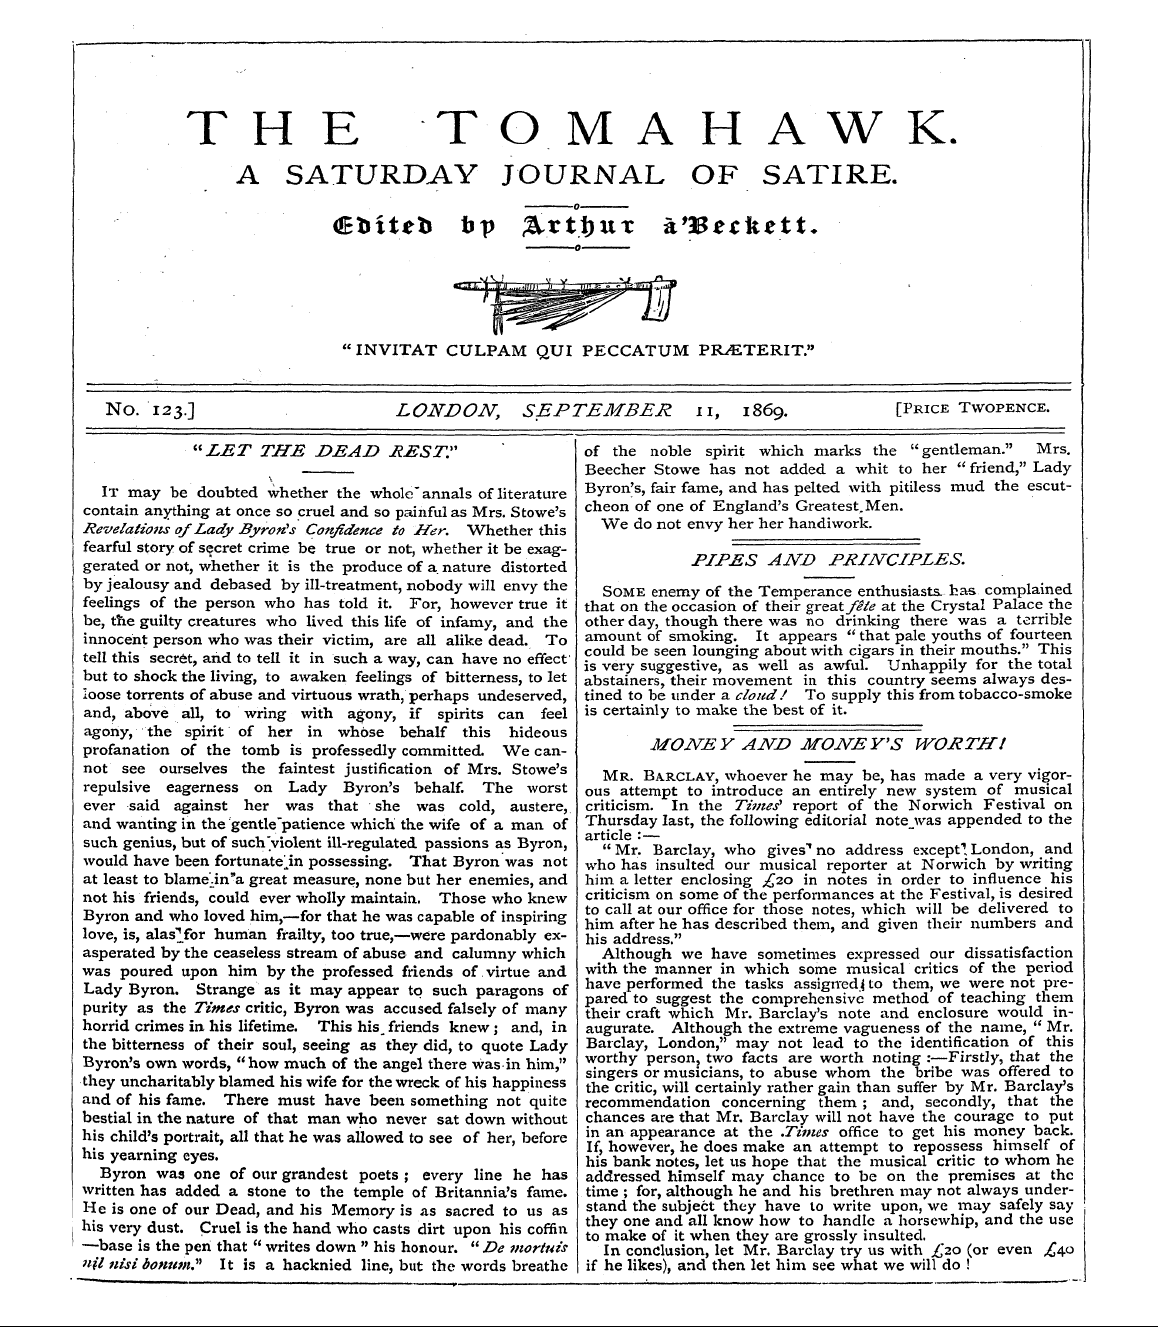 Tomahawk (1867-1870): jS F Y, 1st edition - It May Be Doubted Whether The Whole" Ann...